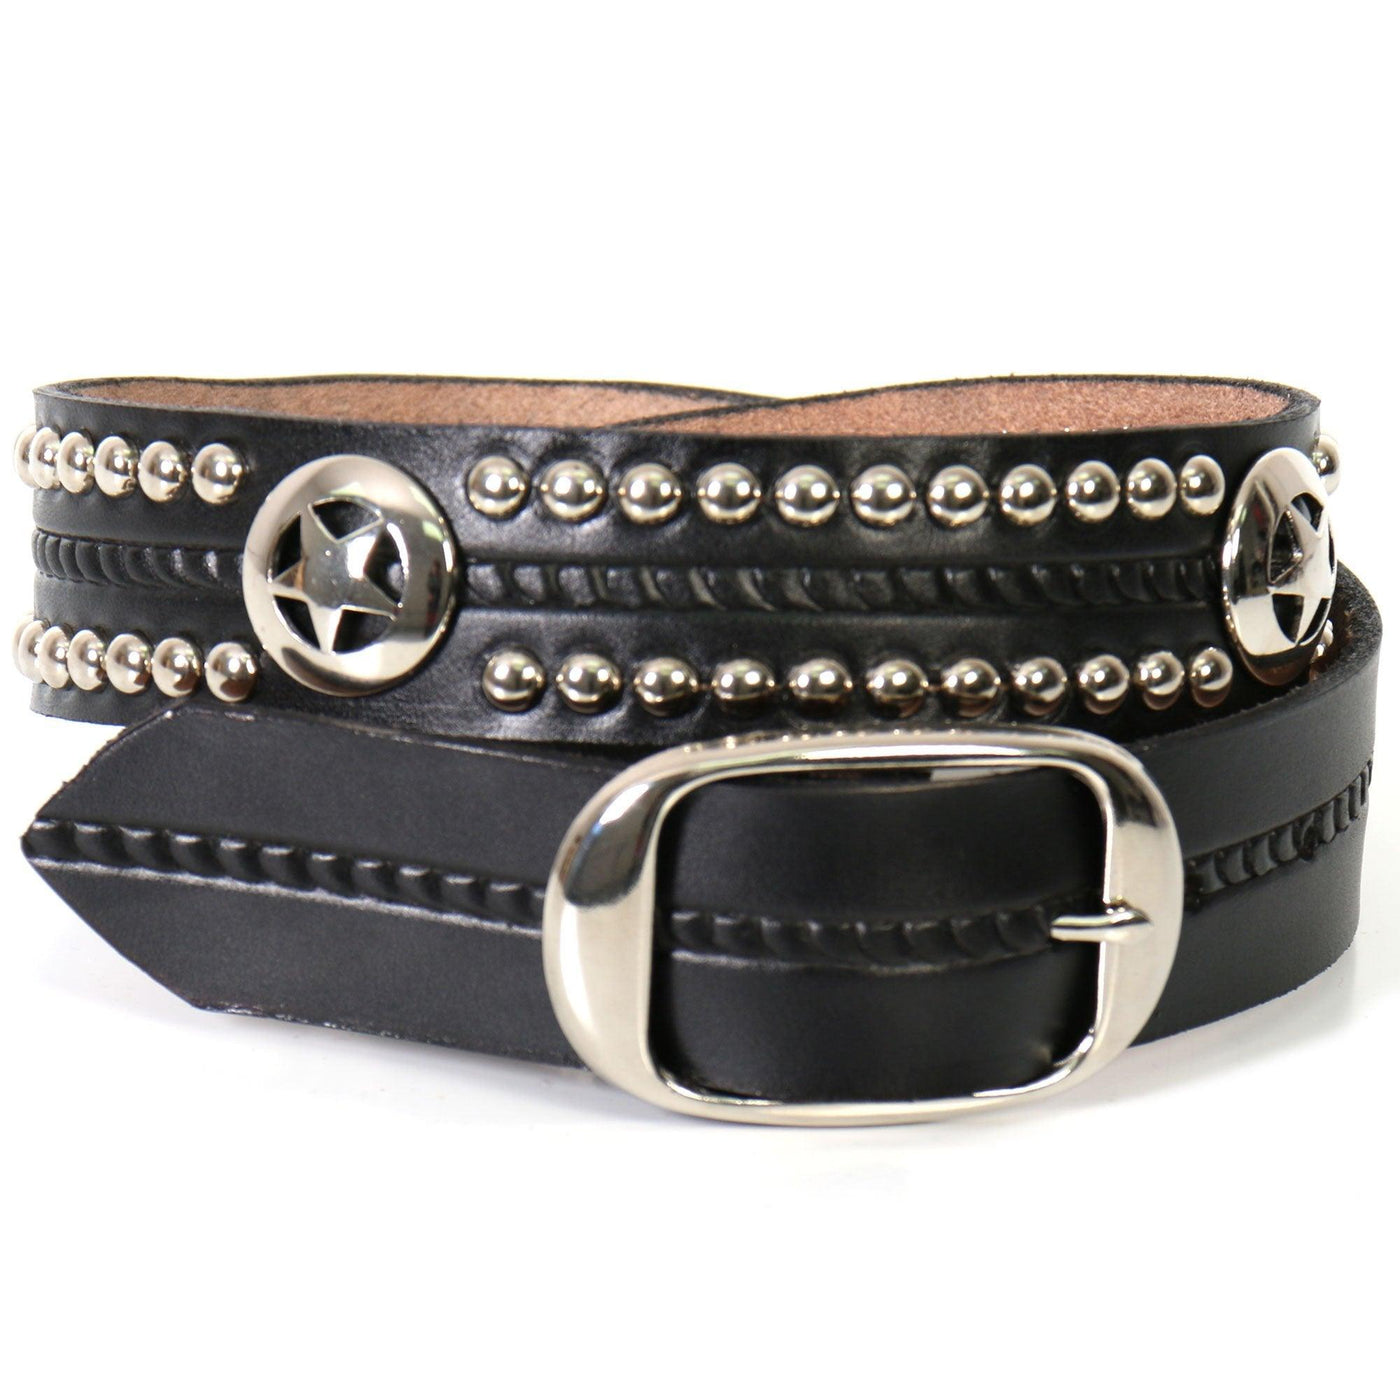 Hot Leathers Western Star And Studs Leather Belt - American Legend Rider